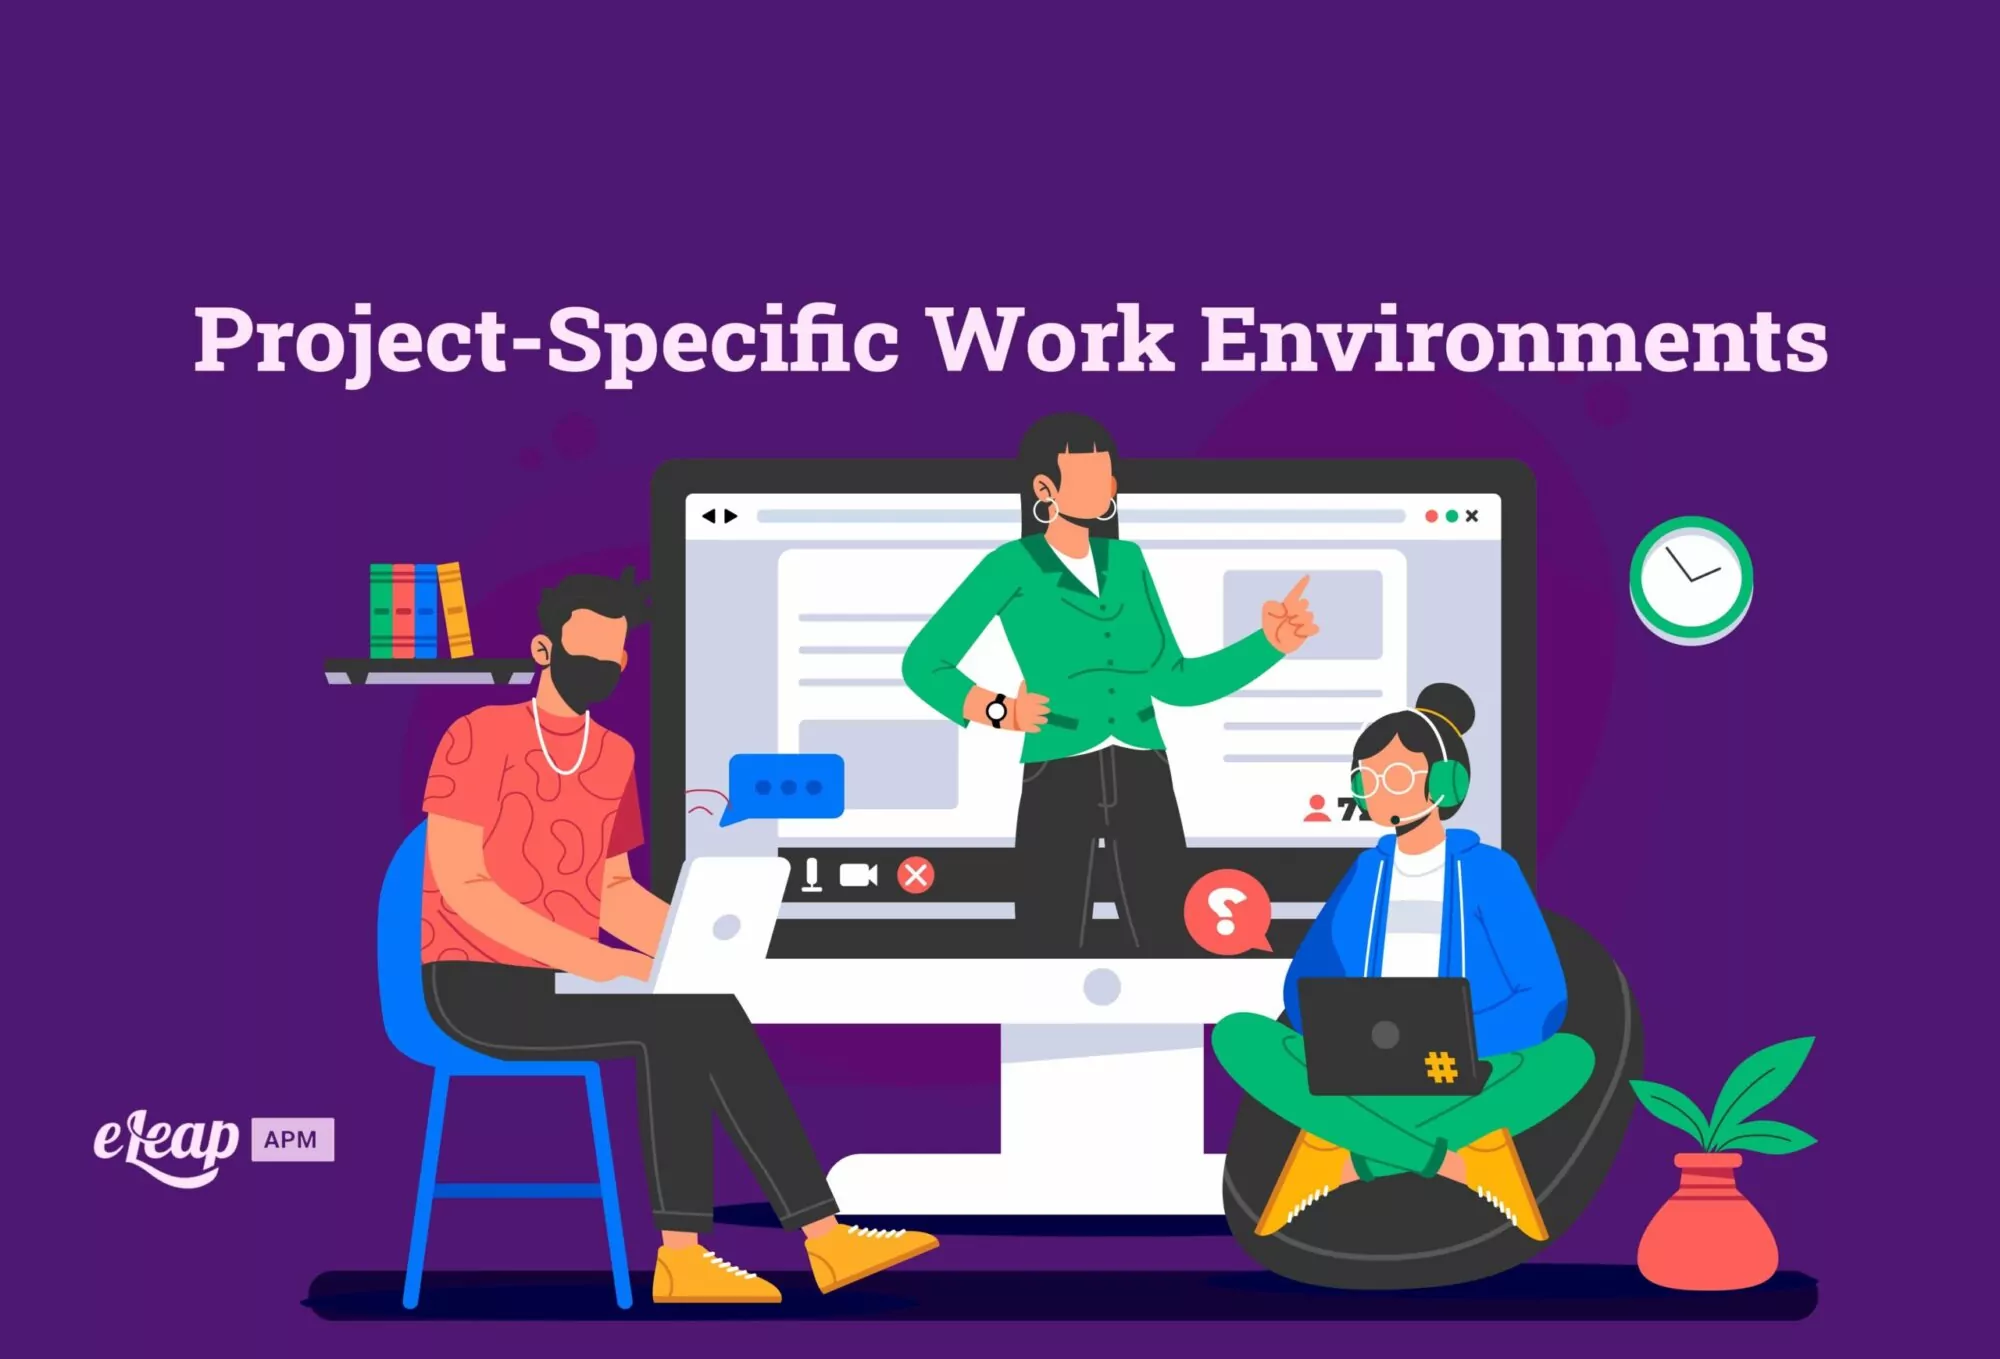 Project-Specific Work Environments